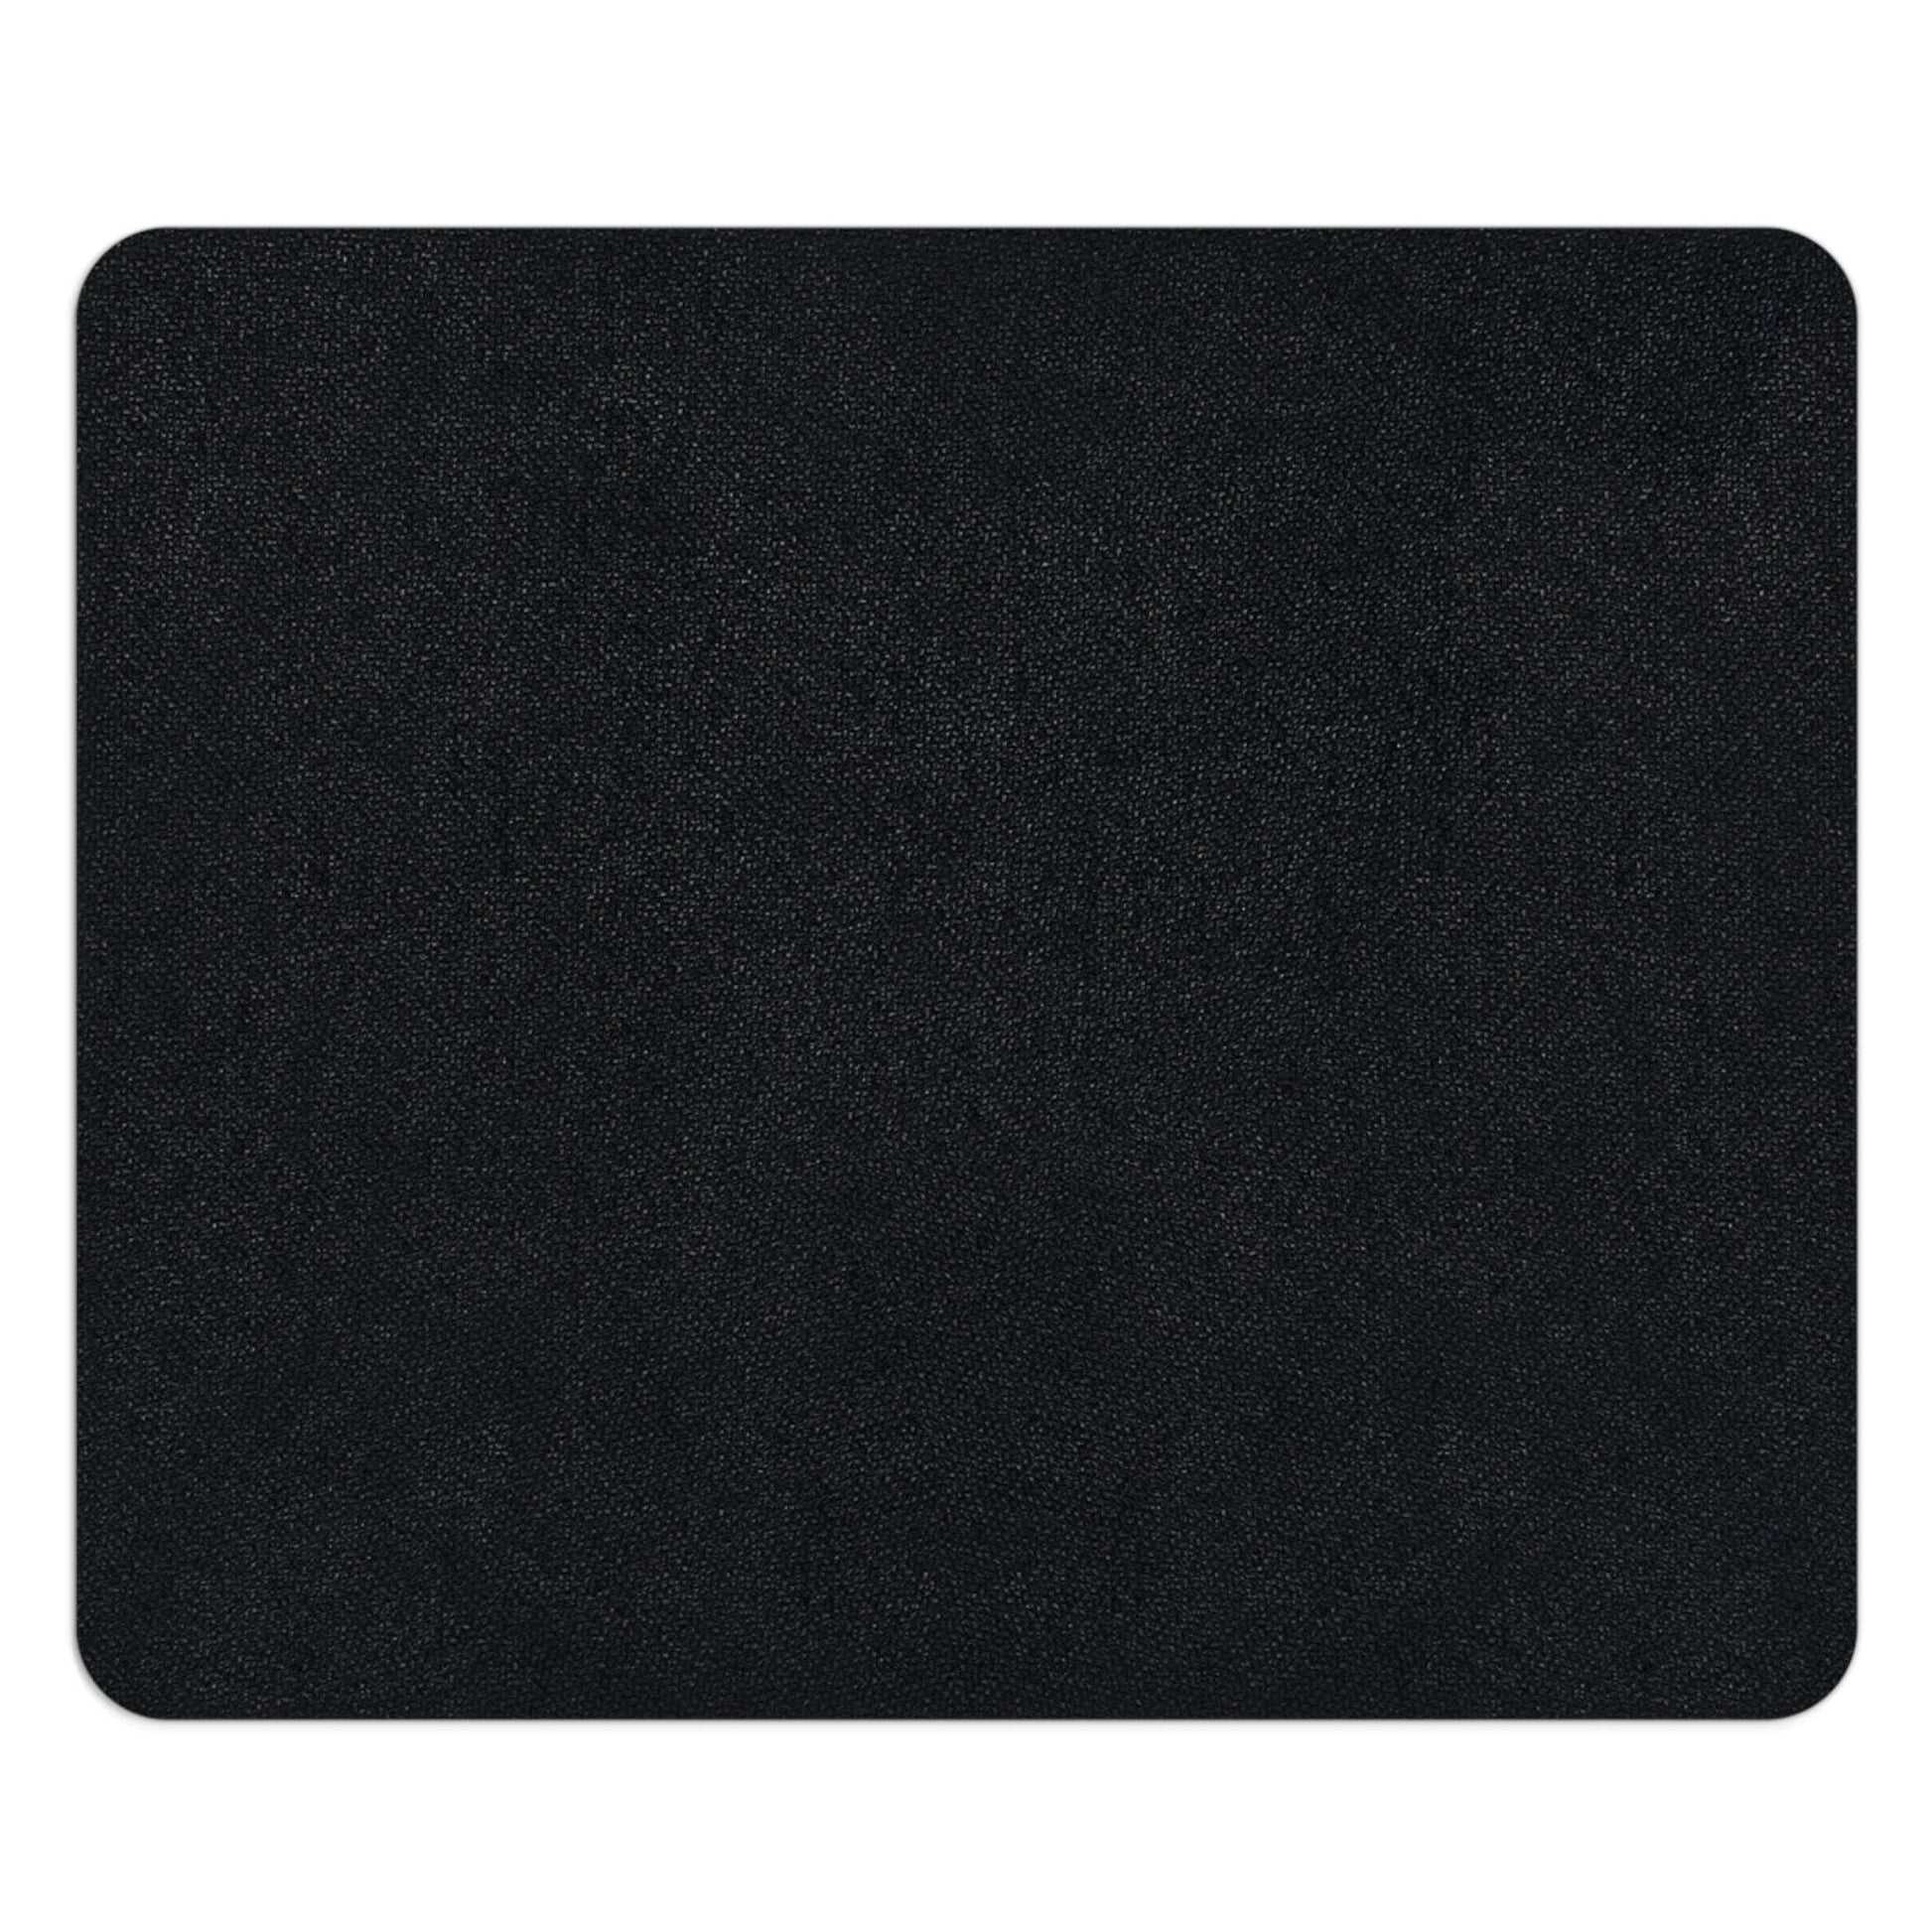 Computer Mouse Pad, Non-slip rubber bottom, Hazy Day Flowers